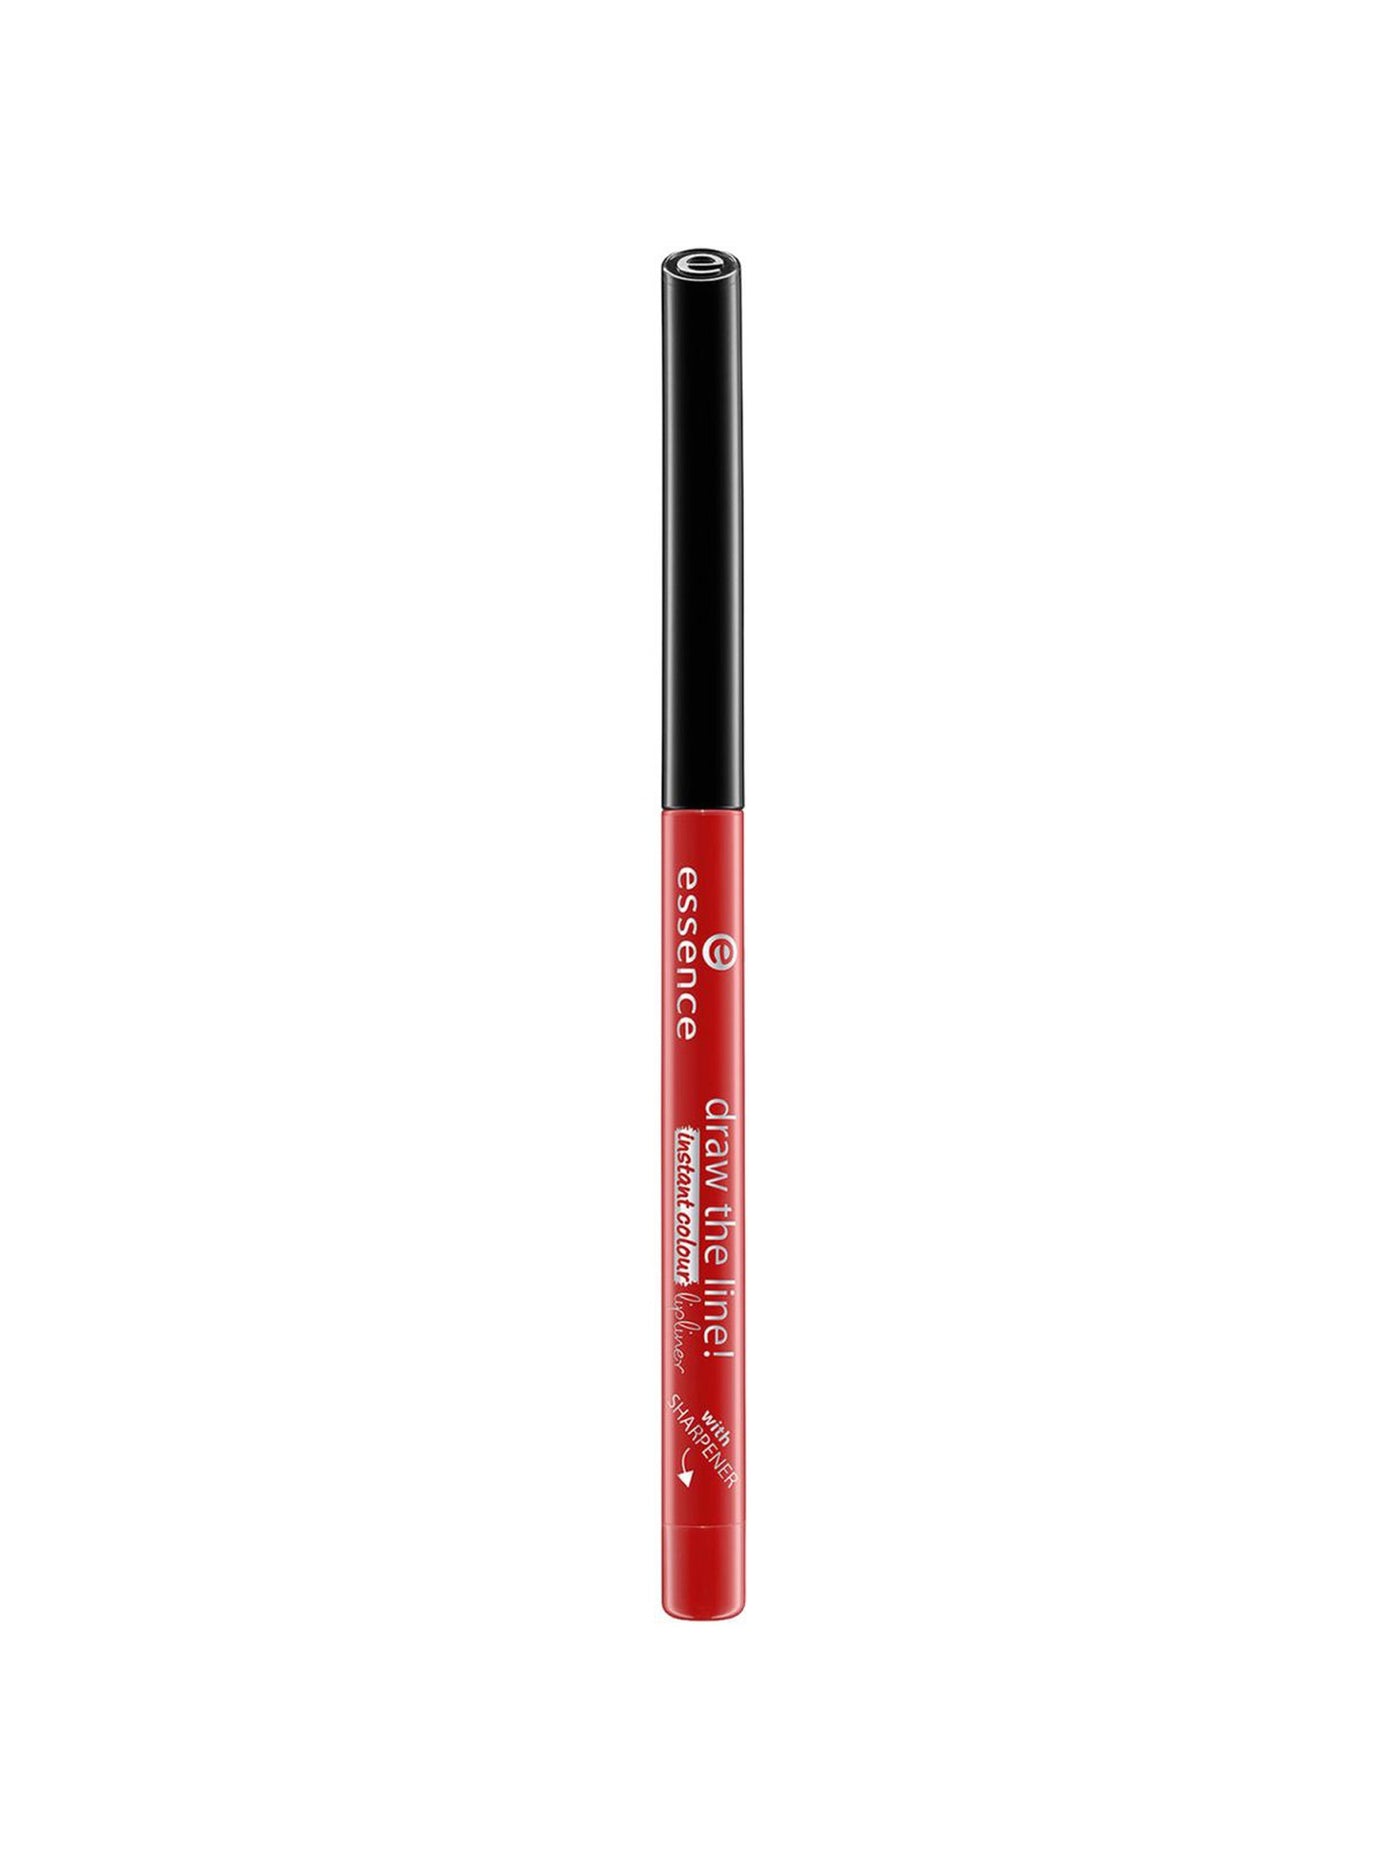 Essence Draw The Line! Instant Colour Lipliner - Shade 12 Head To-Ma-Toes